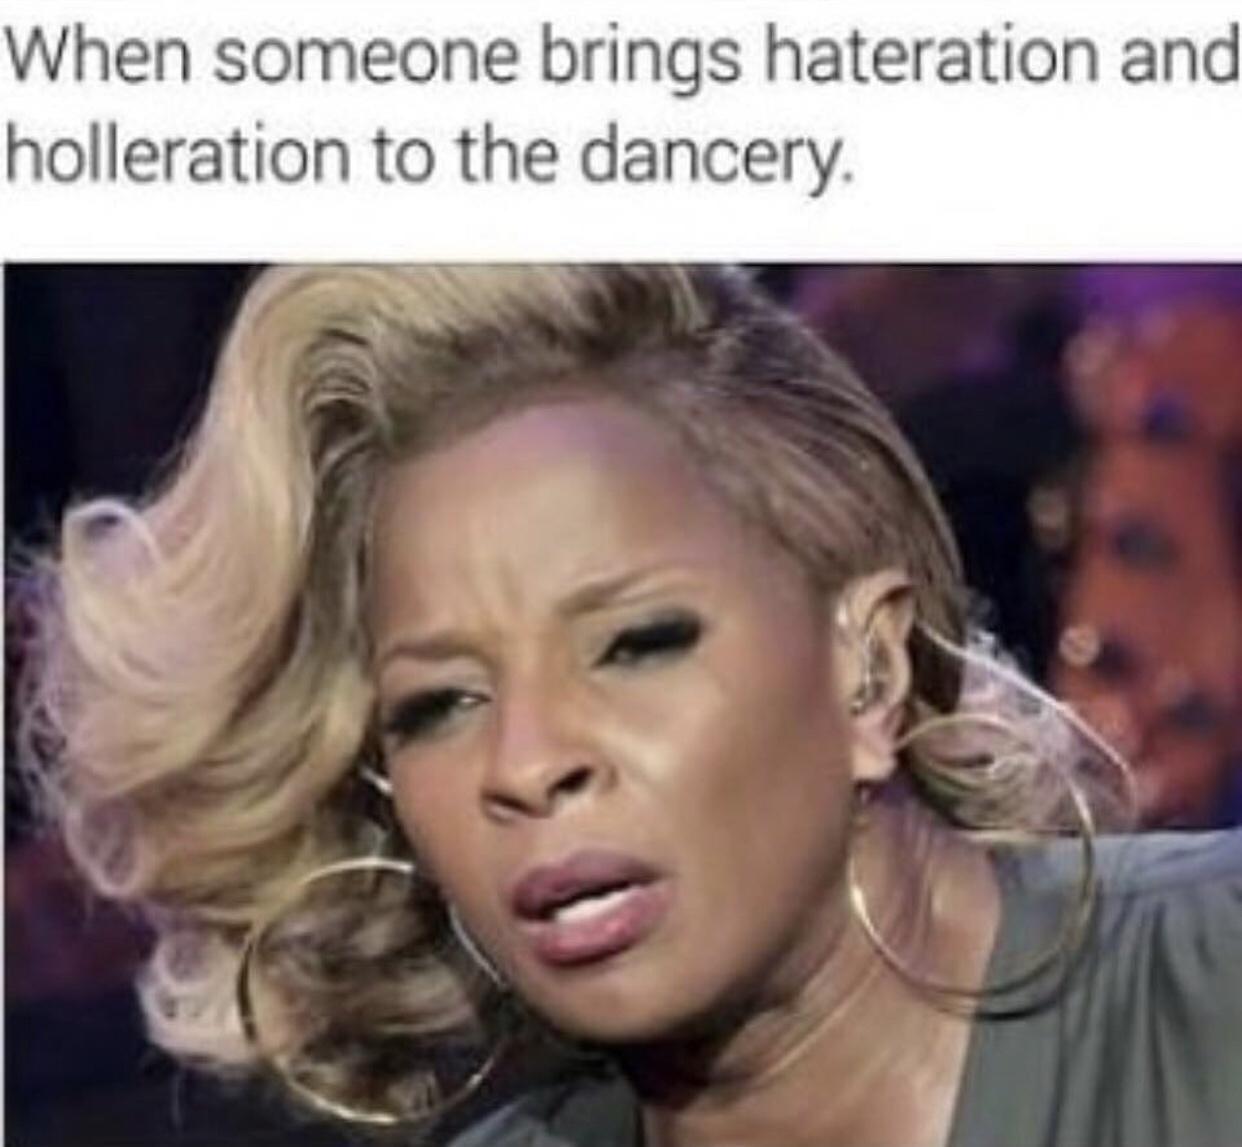 fresh memes - hateration meme - When someone brings hateration and holleration to the dancery.